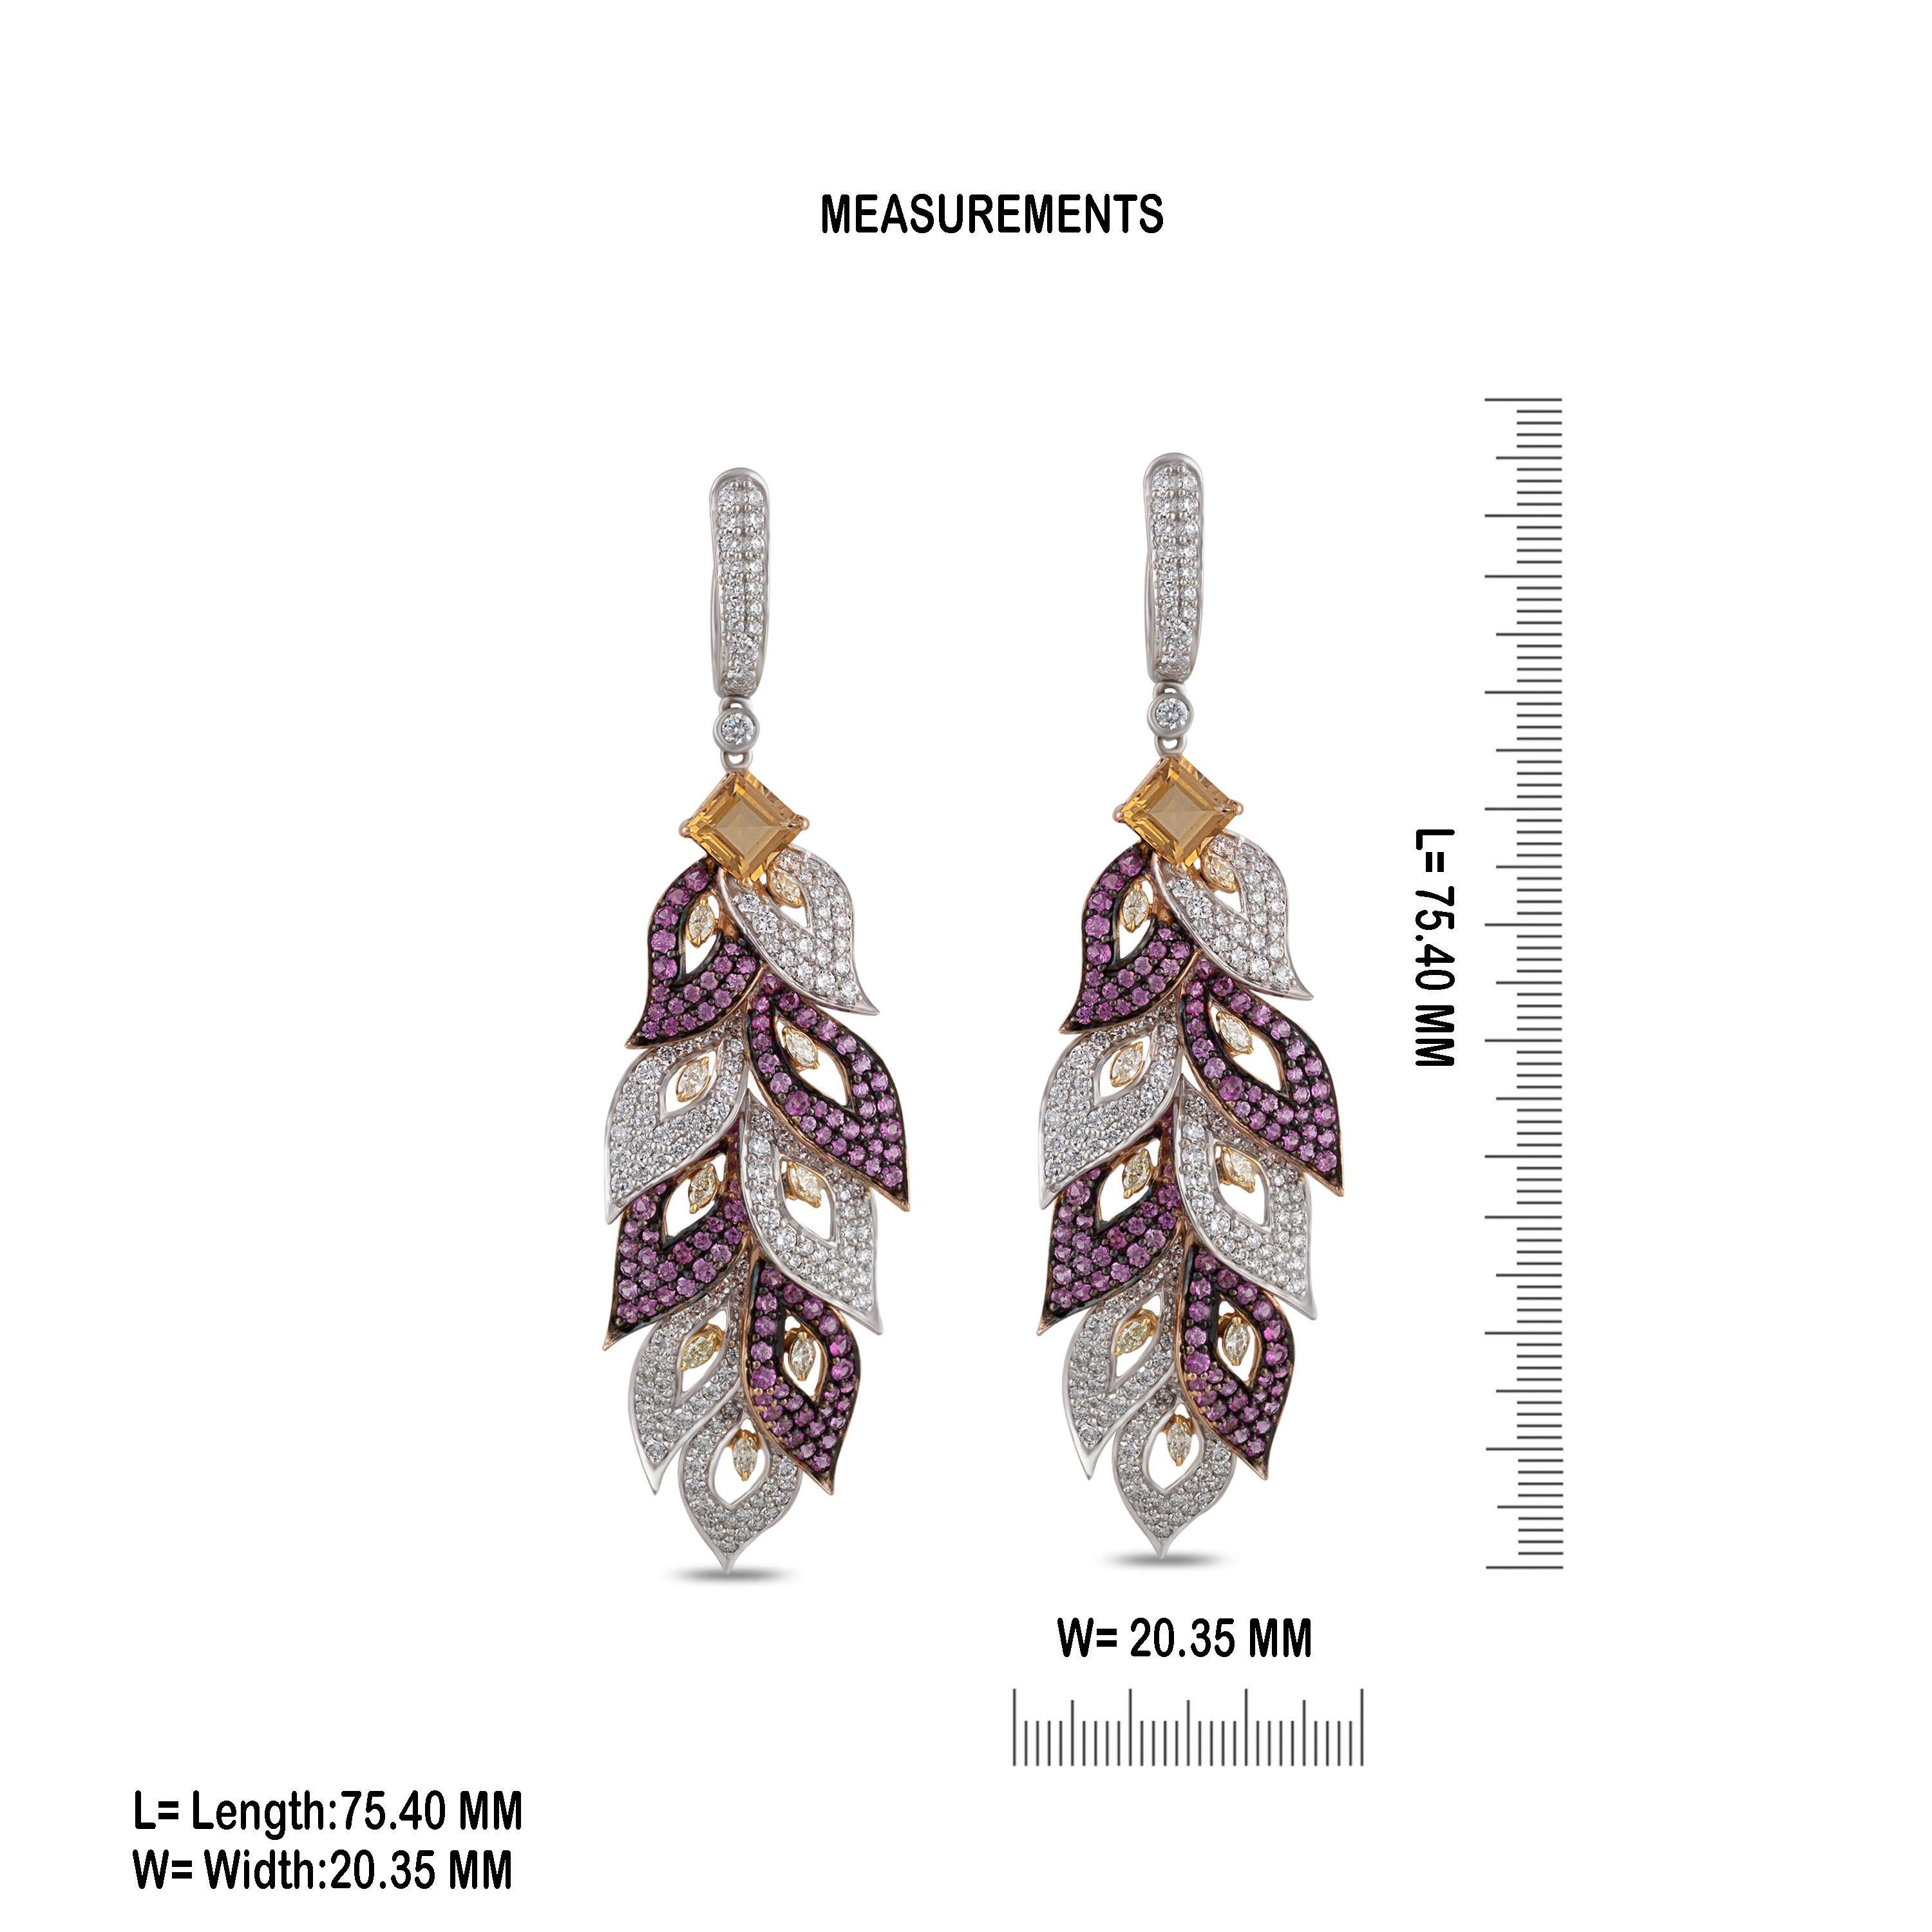 Studio Rêves Diamond and Pink Sapphire Leaves Dangling Earrings in 18 Karat Gold In New Condition For Sale In Mumbai, Maharashtra